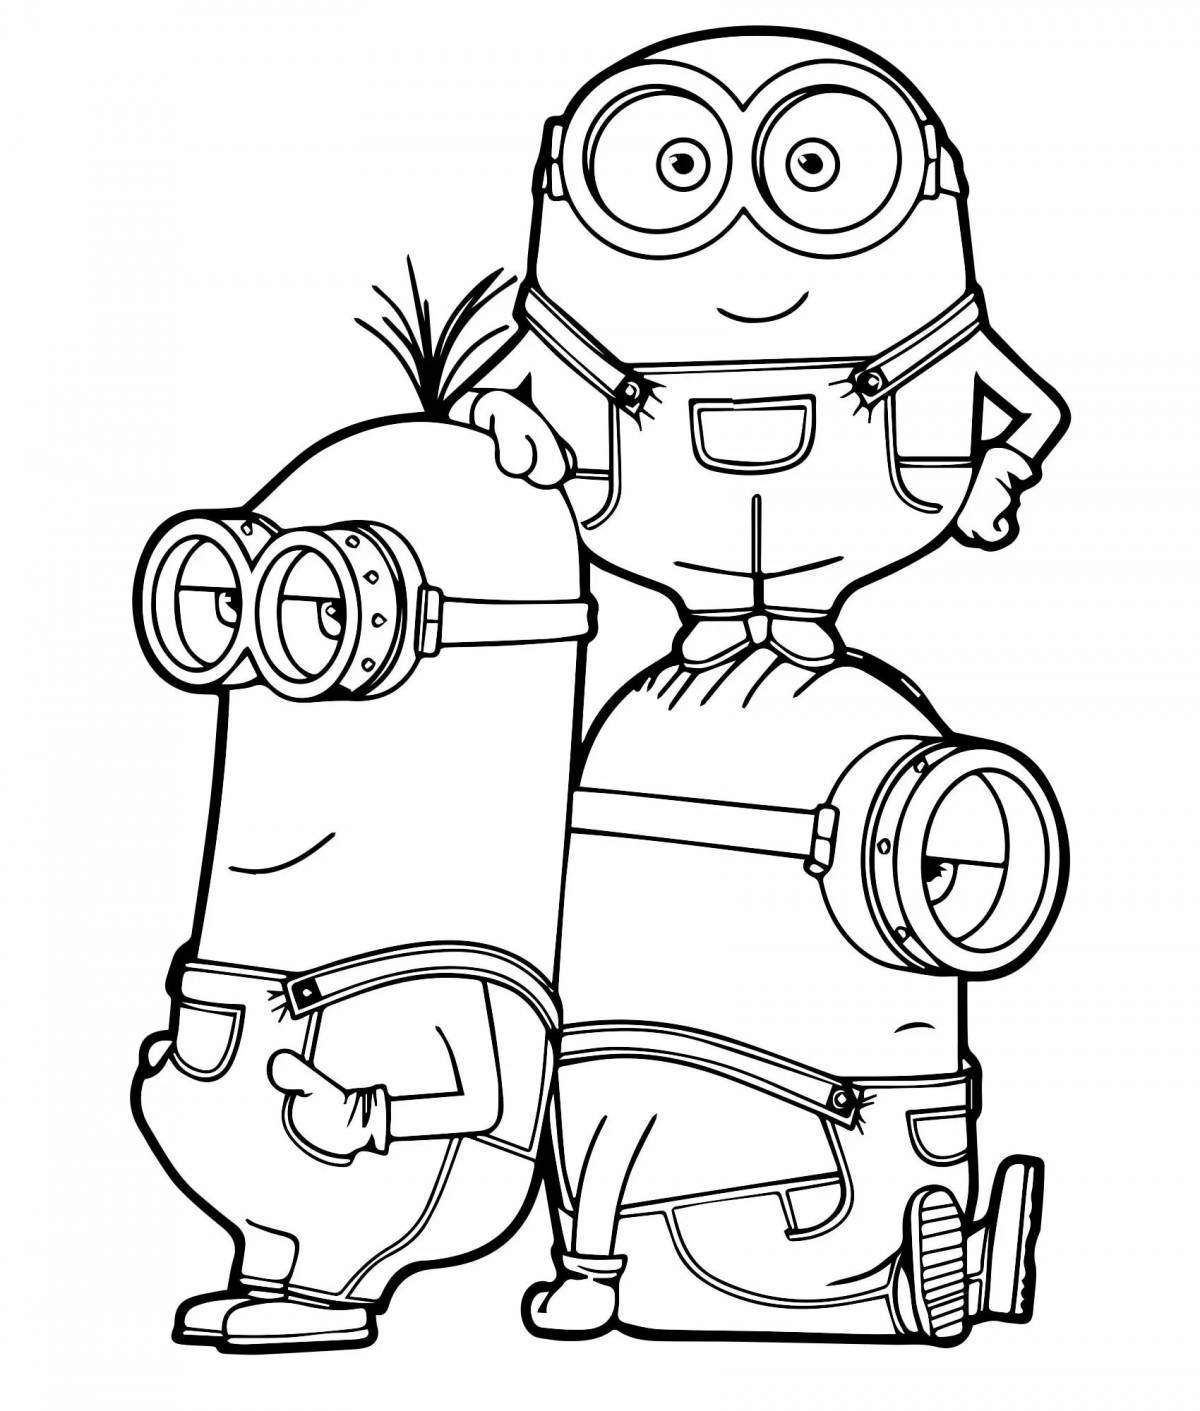 Fancy minion coloring pages